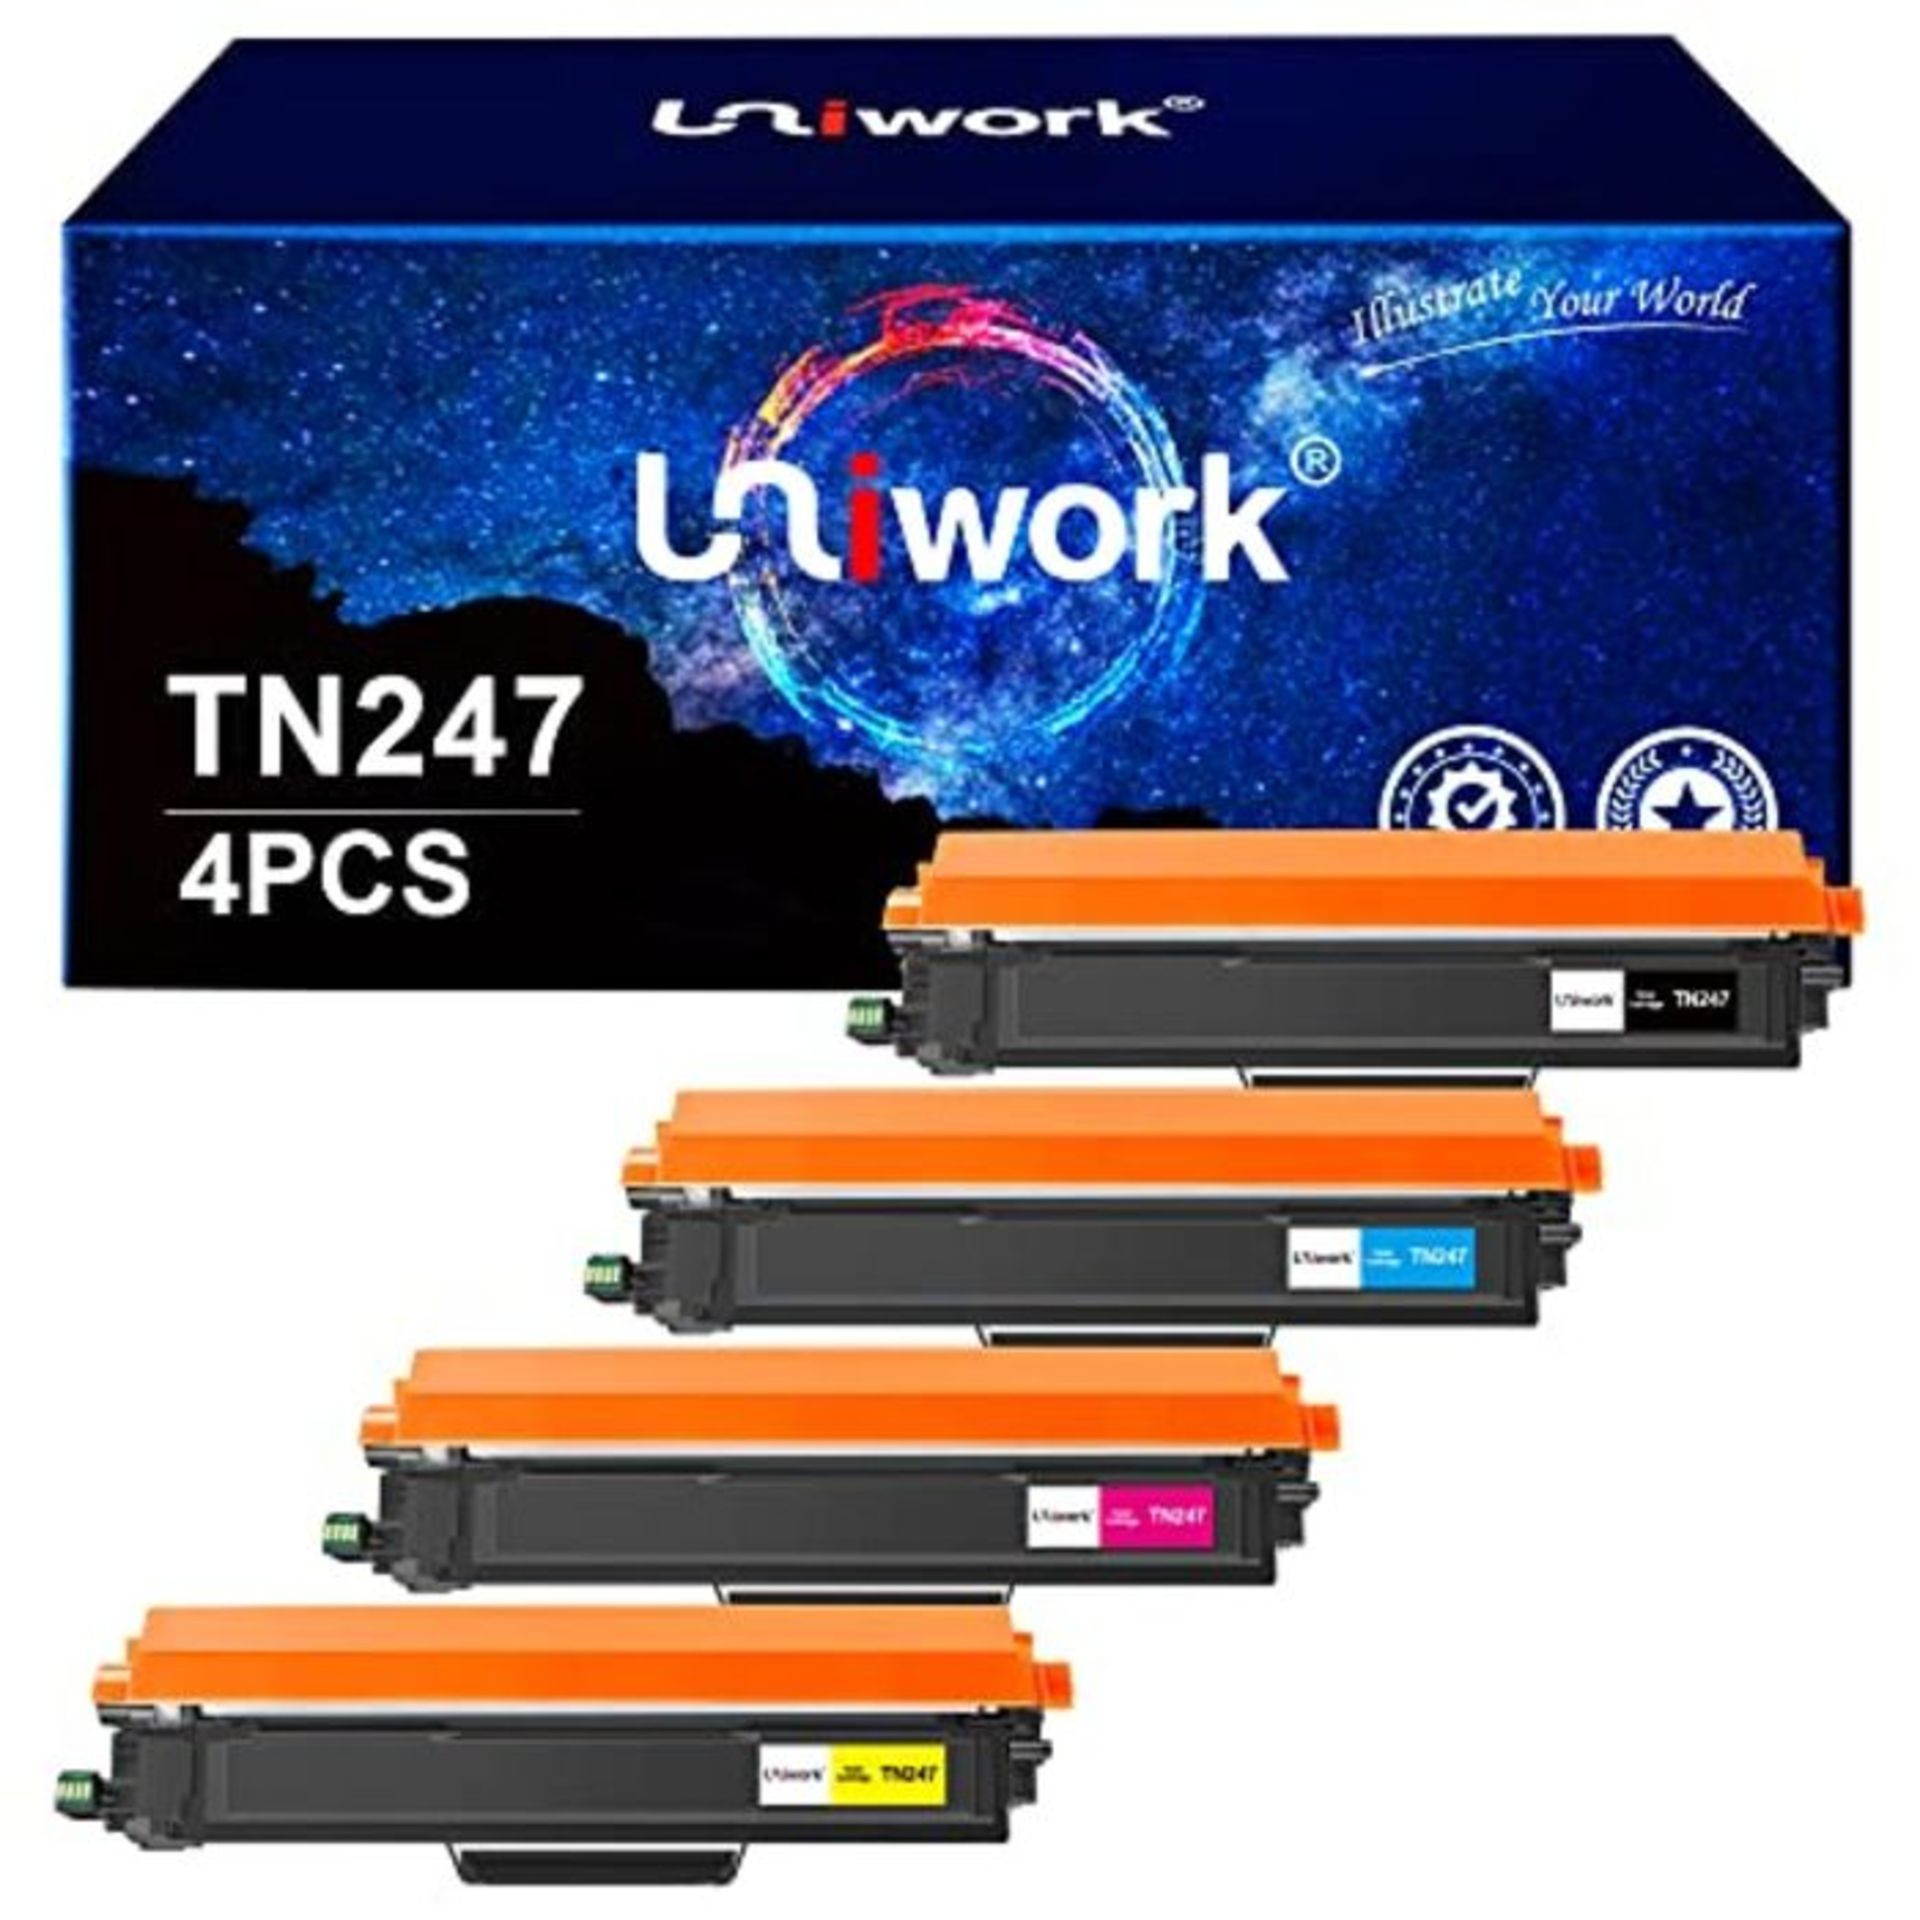 Uniwork Toner Cartridge Replacement for Brother TN247 Compatible with L3210CW L3230CDW